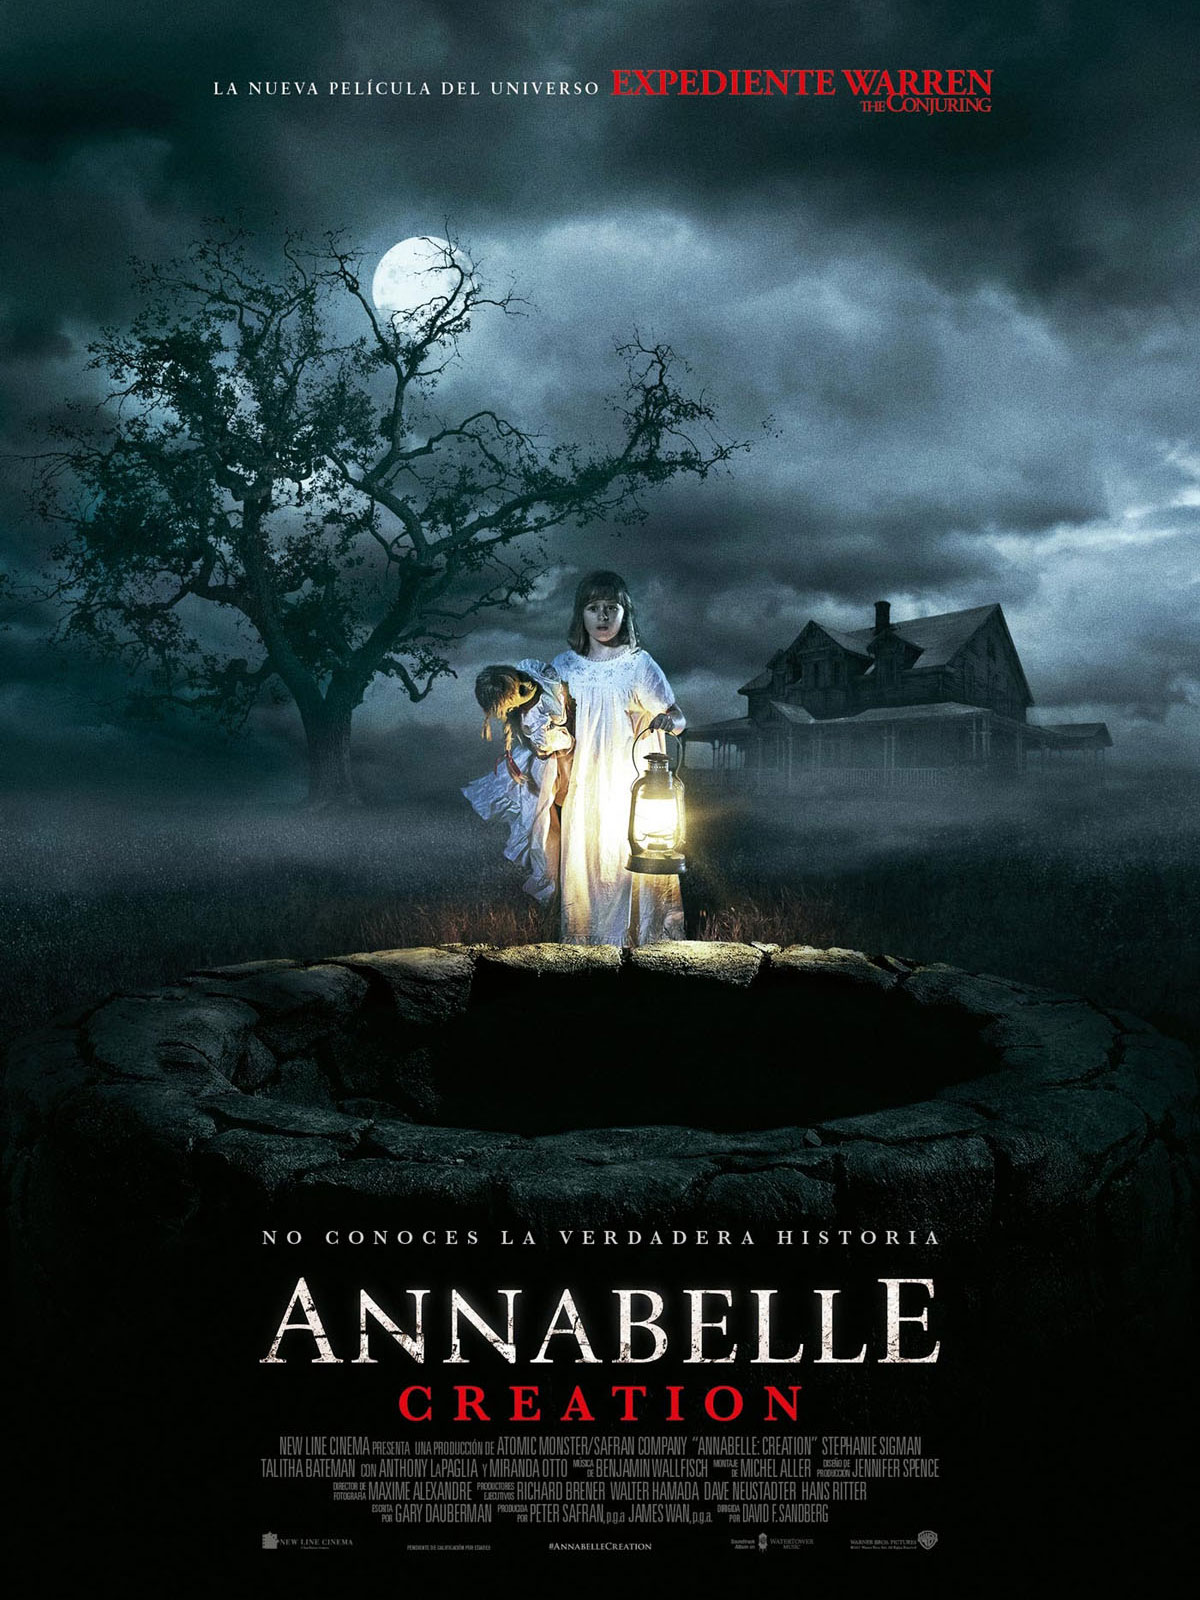 ANABELLE